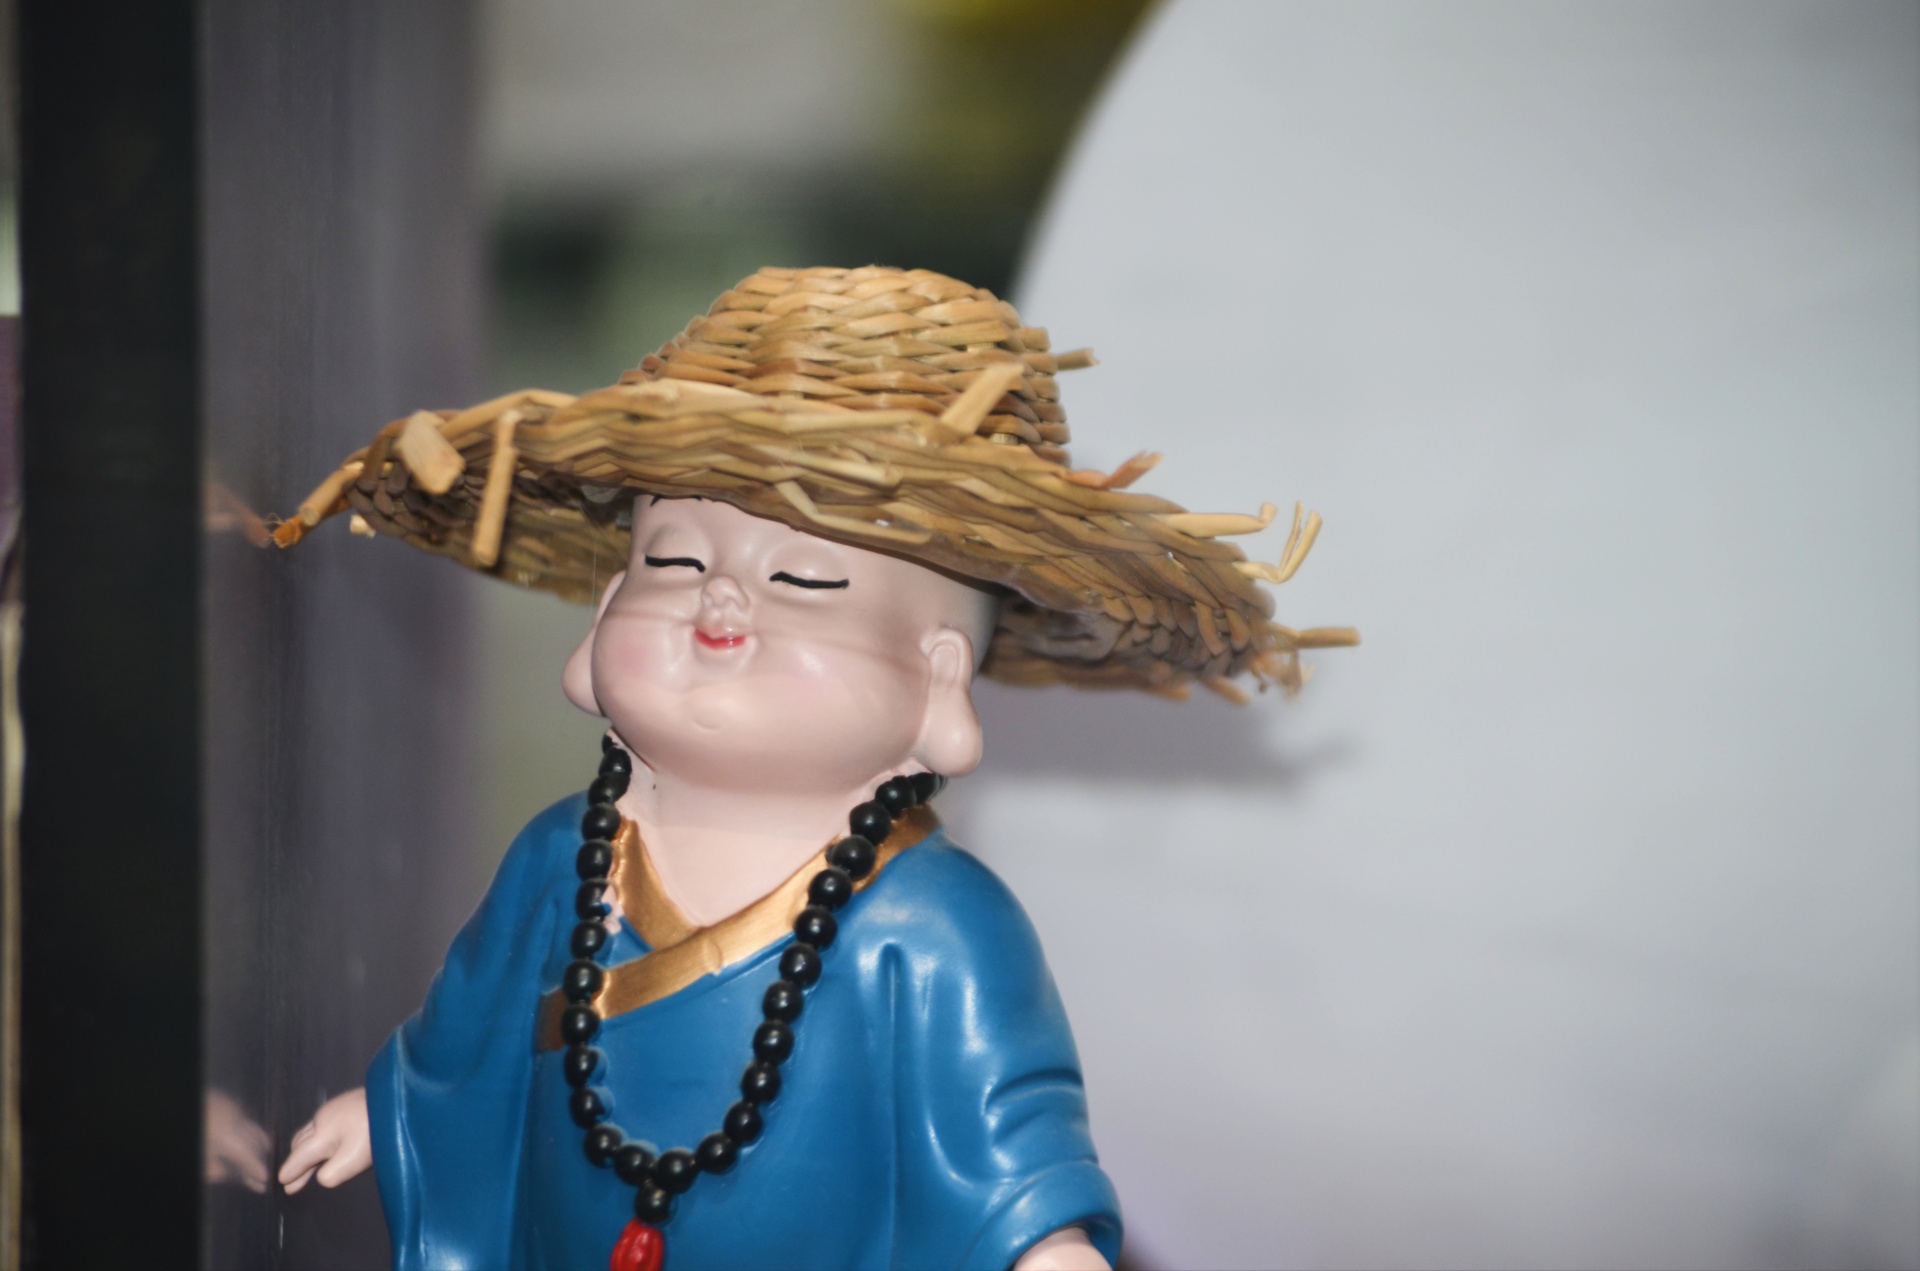 figurine with hat